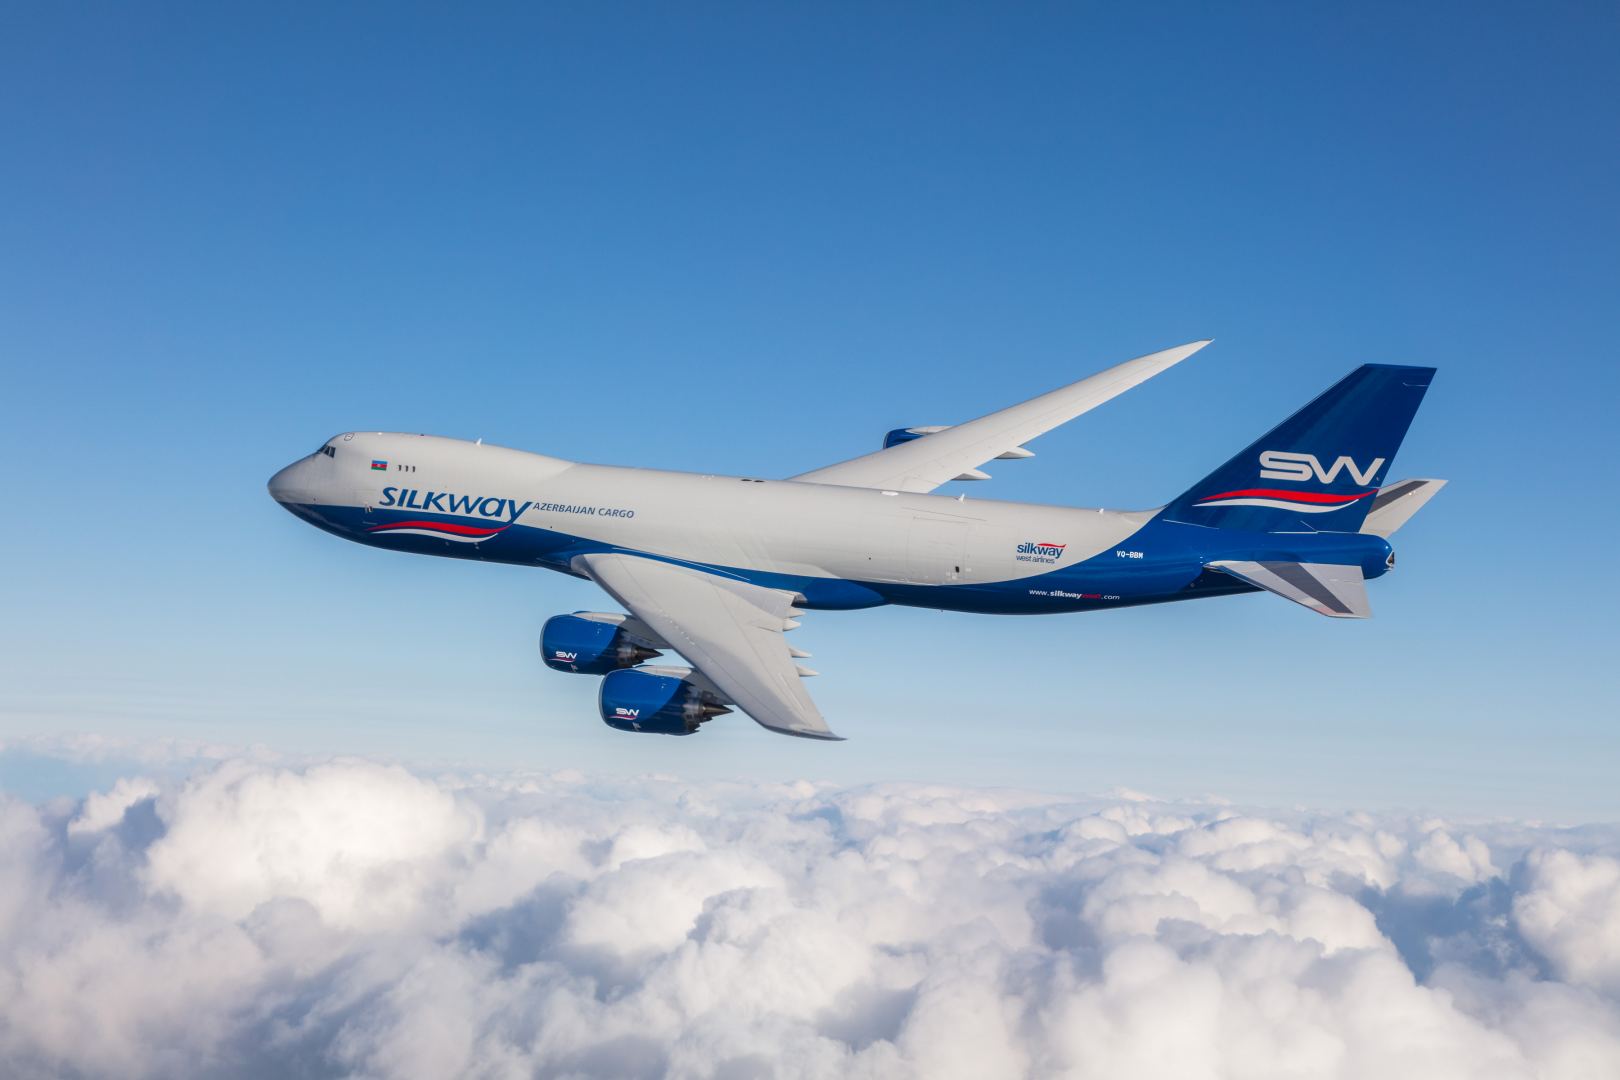 Silk Way West Airlines further expands its global network in US